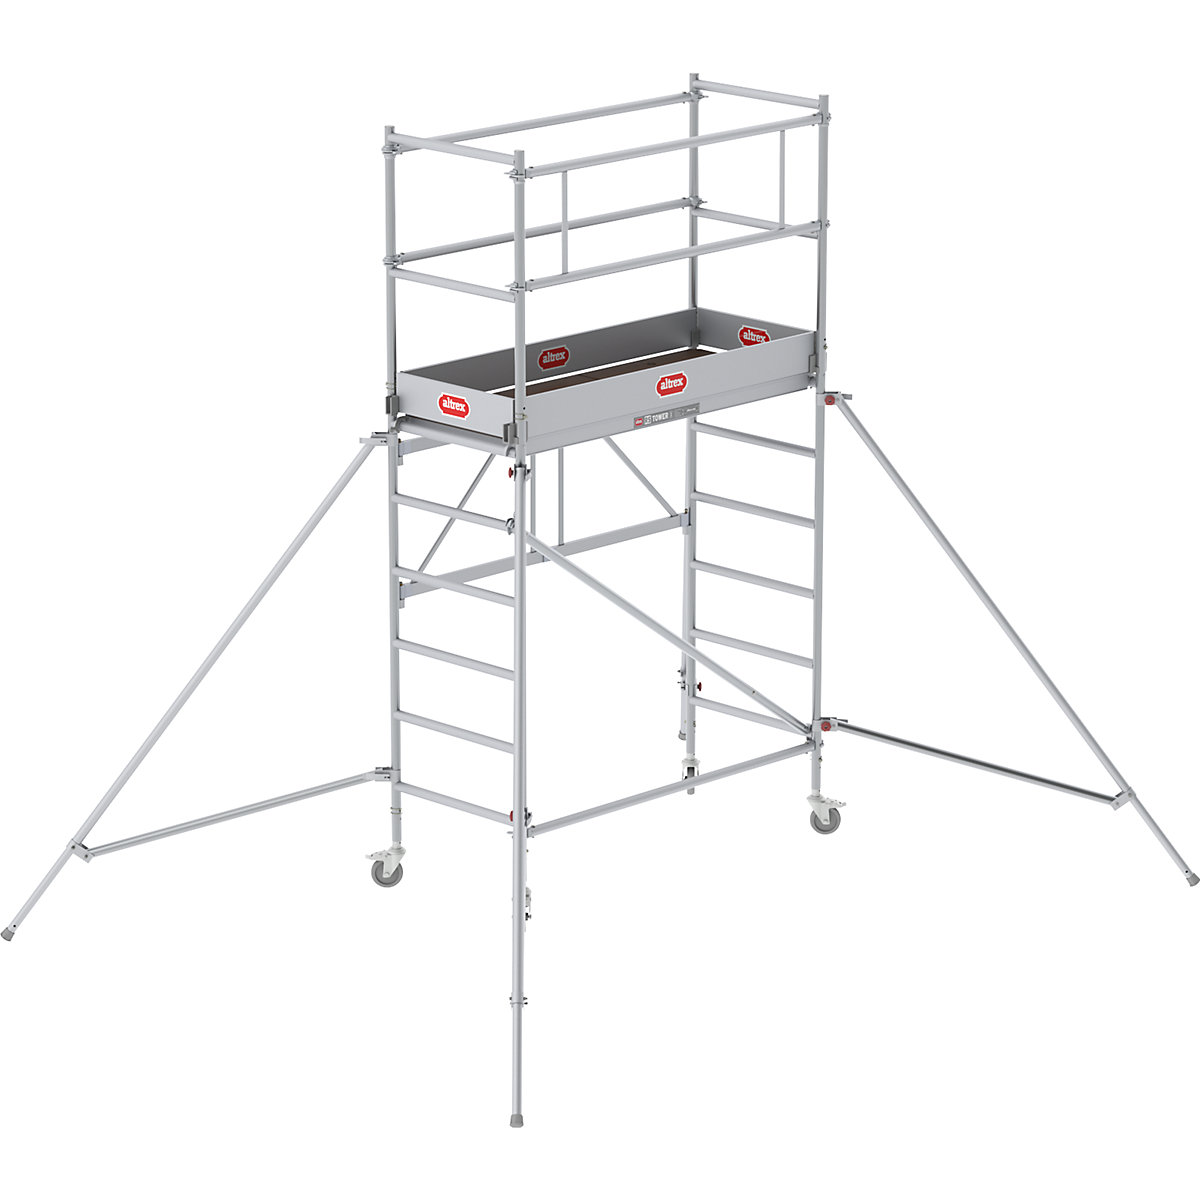 RS TOWER 34 folding tower - Altrex